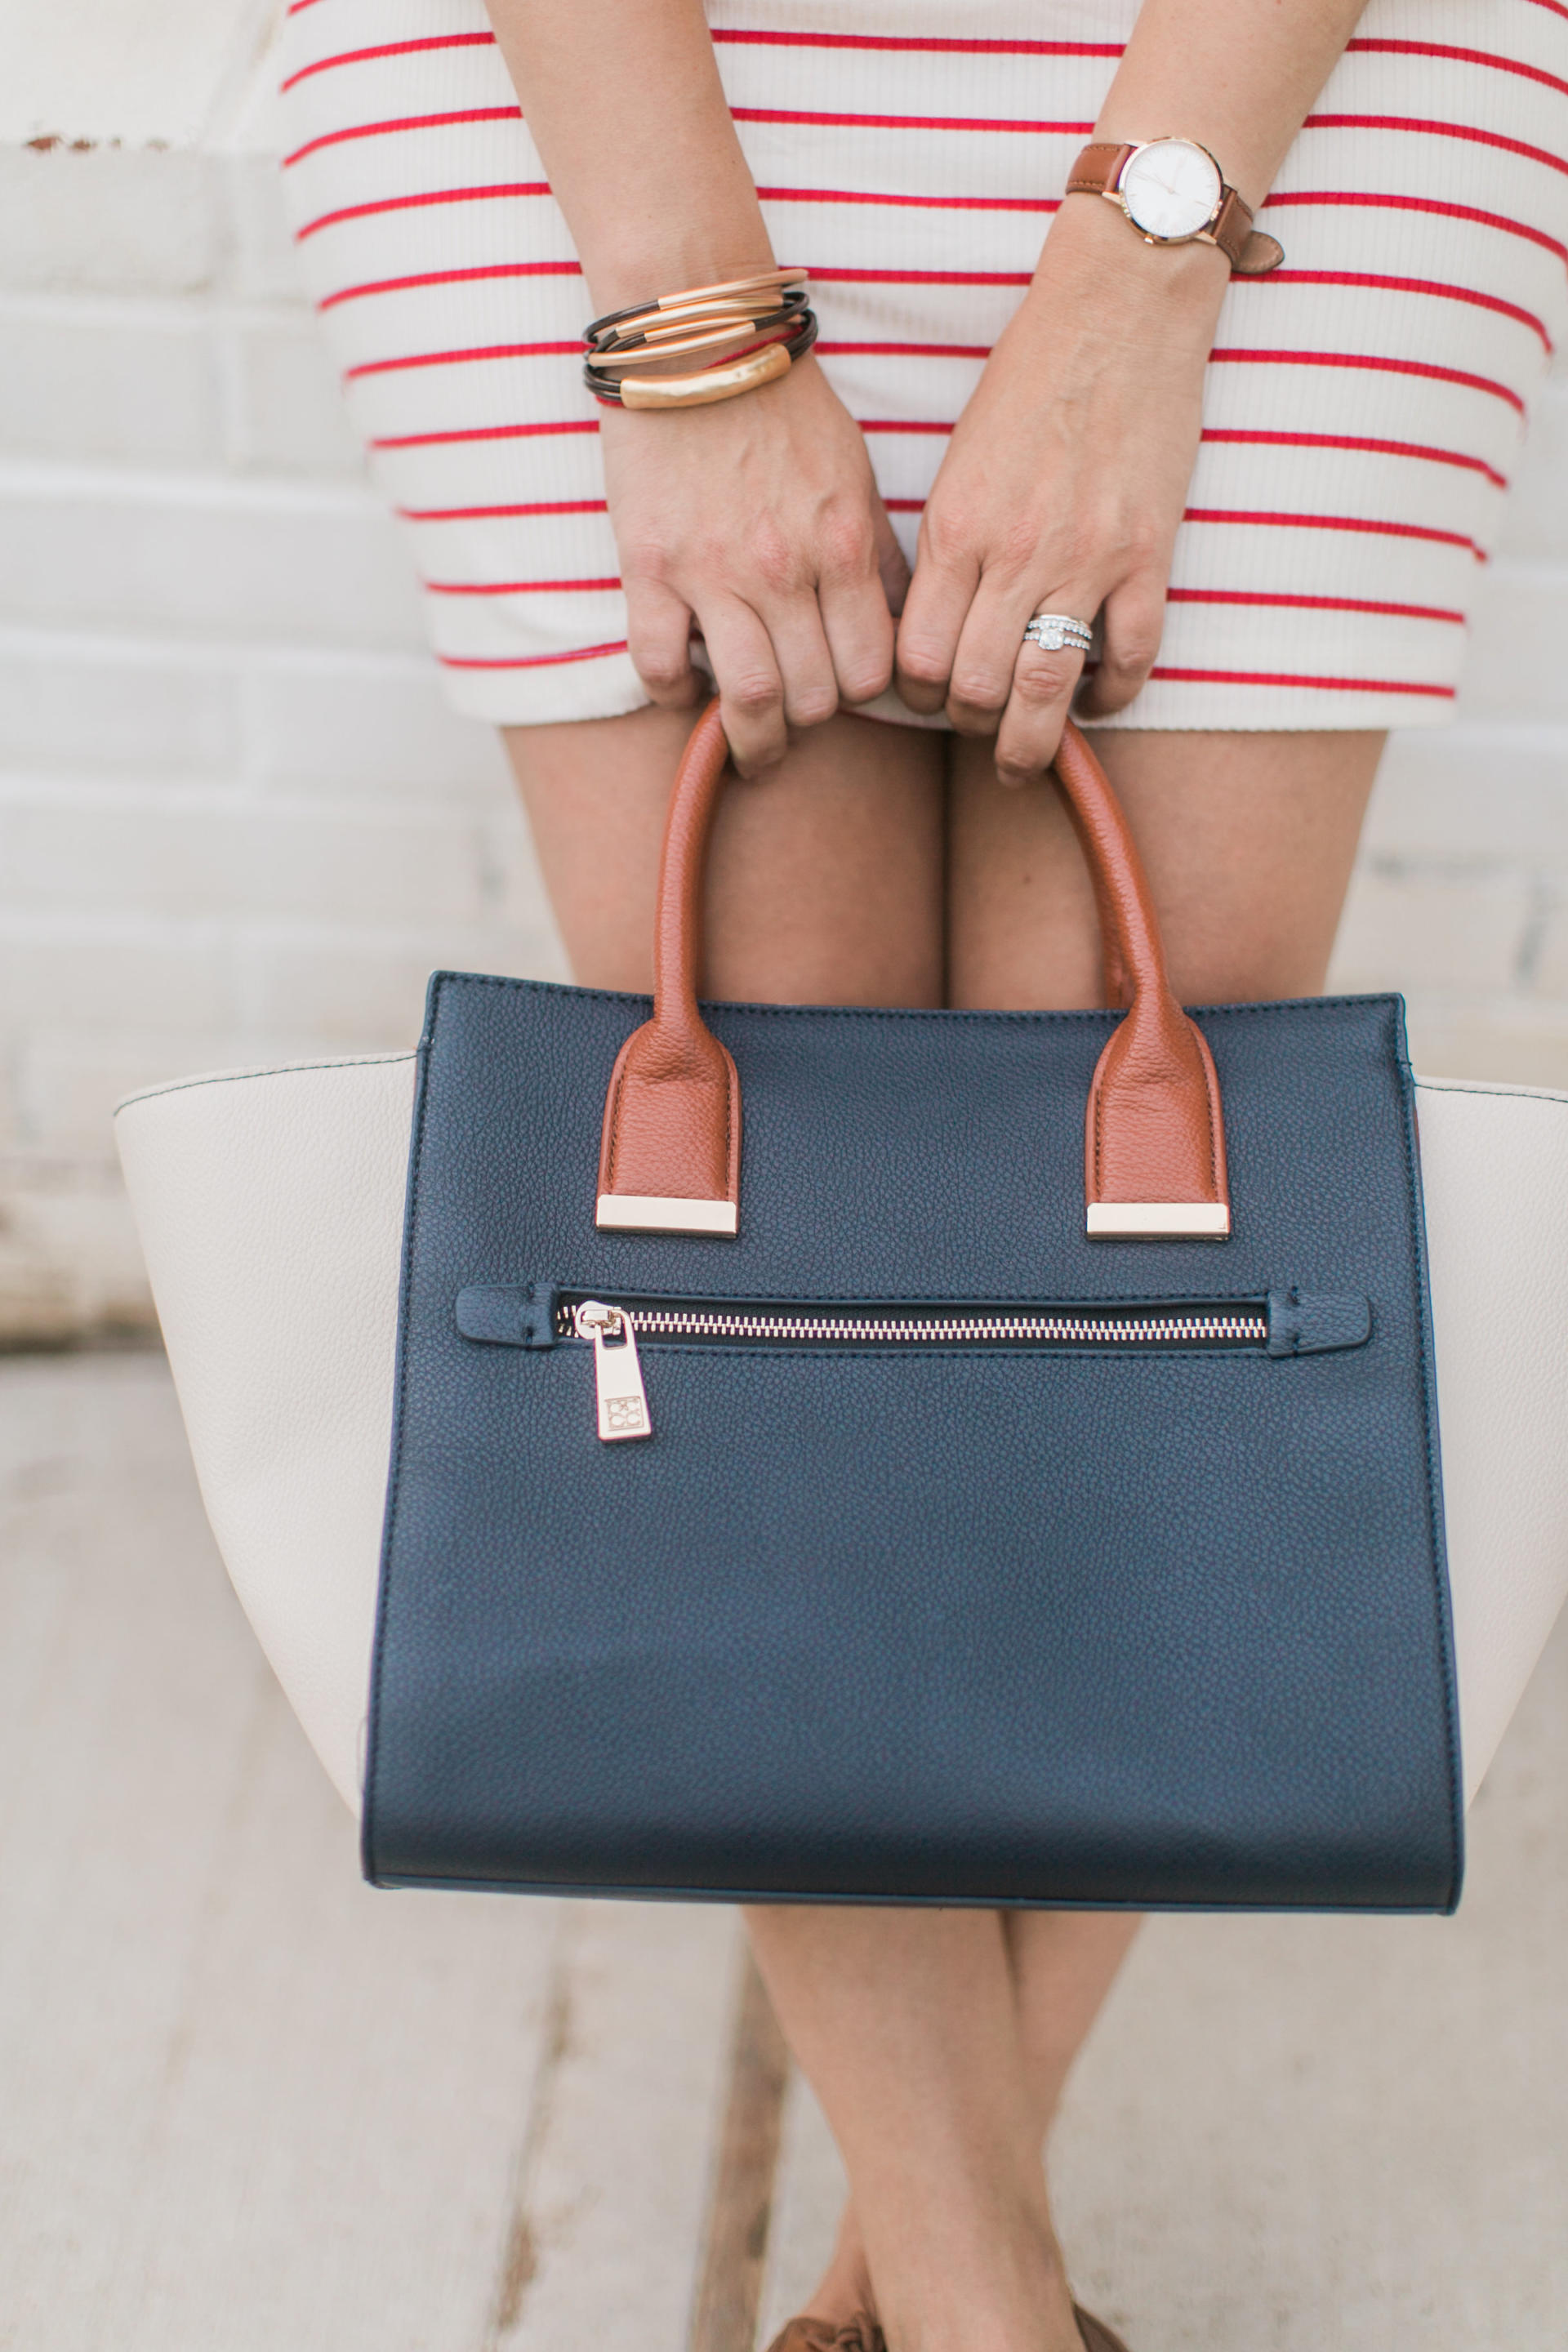 STYLE: Falling Into Reformation with 88 Handbags